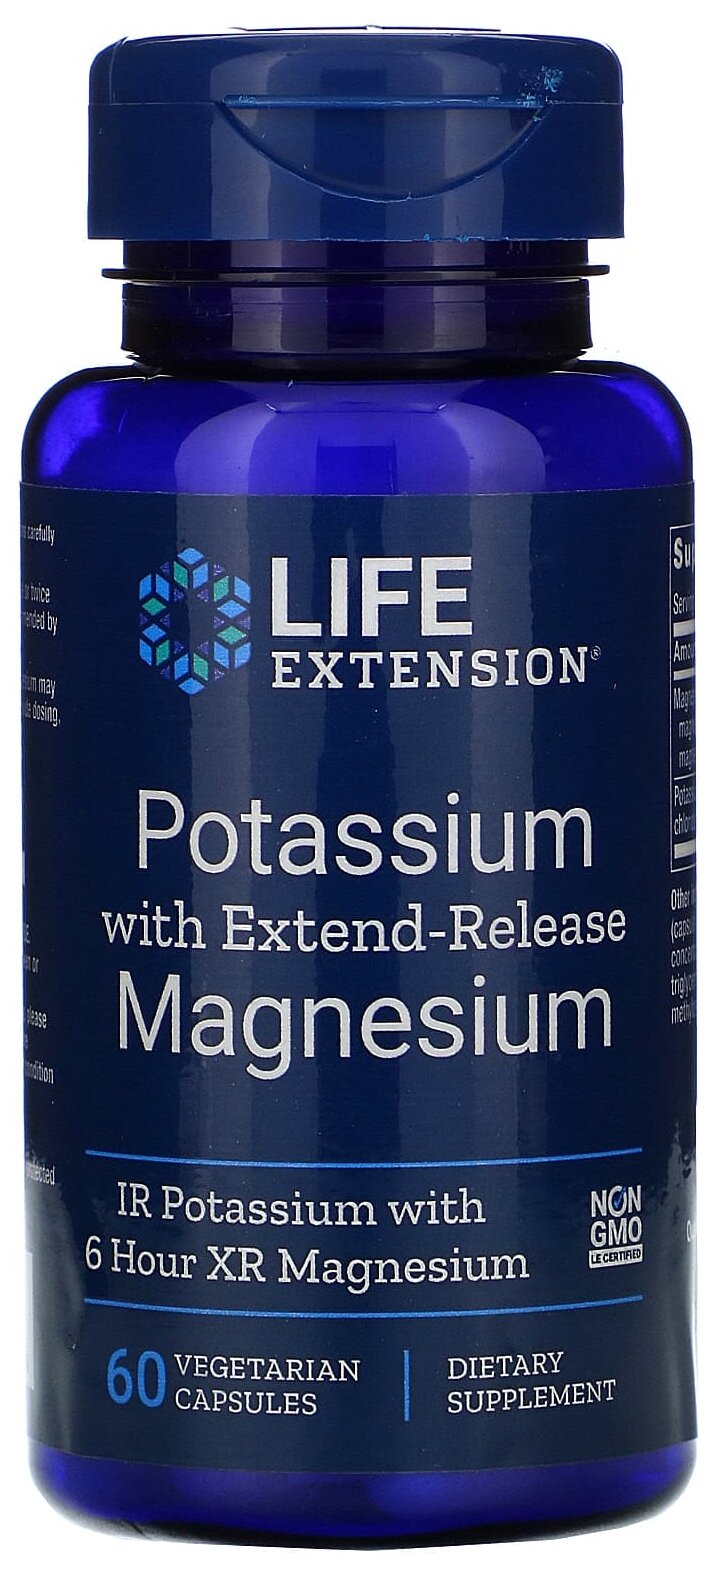 Капсулы Life Extension Potassium with Extend-Release Magnesium